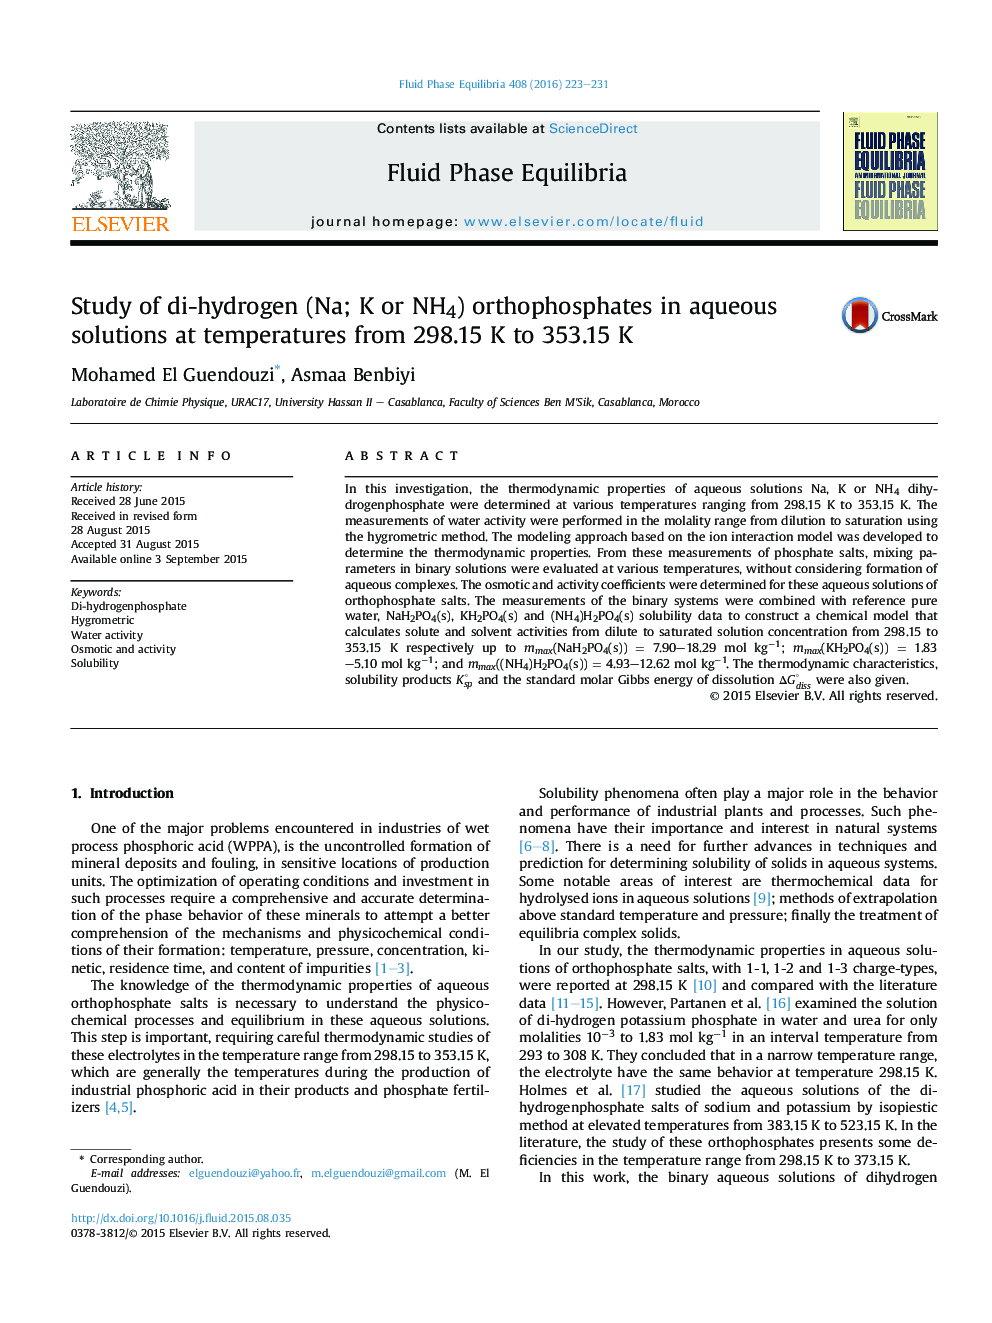 Study of di-hydrogen (Na; K or NH4) orthophosphates in aqueous solutions at temperatures from 298.15 K to 353.15 K